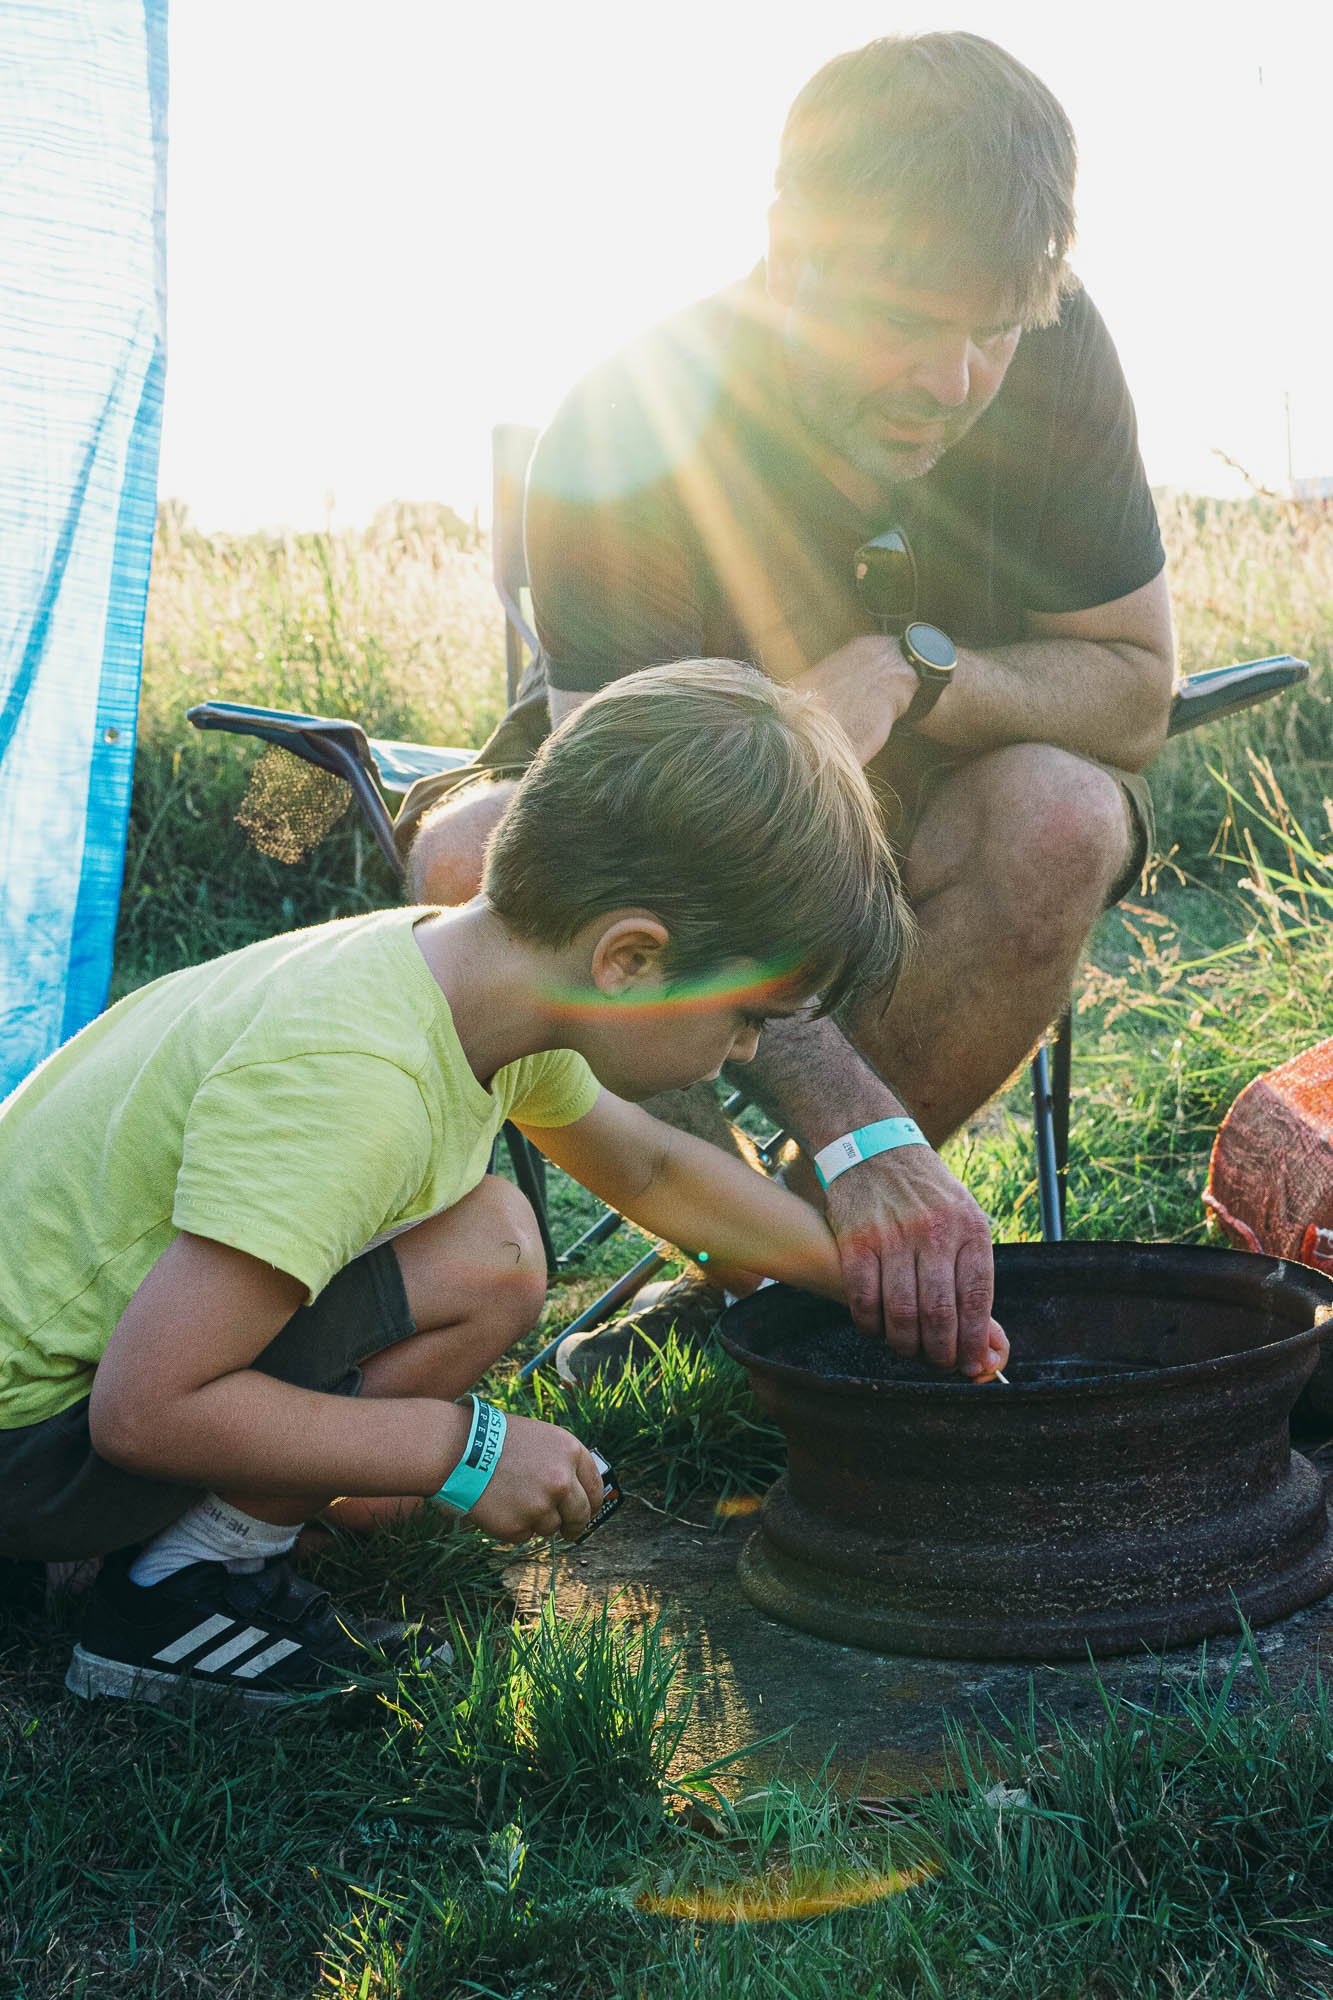 dad-and-son-building-camp-fire-family-photographer-sussex-unposed-natural-family-portraits-golden-hour-light.jpg